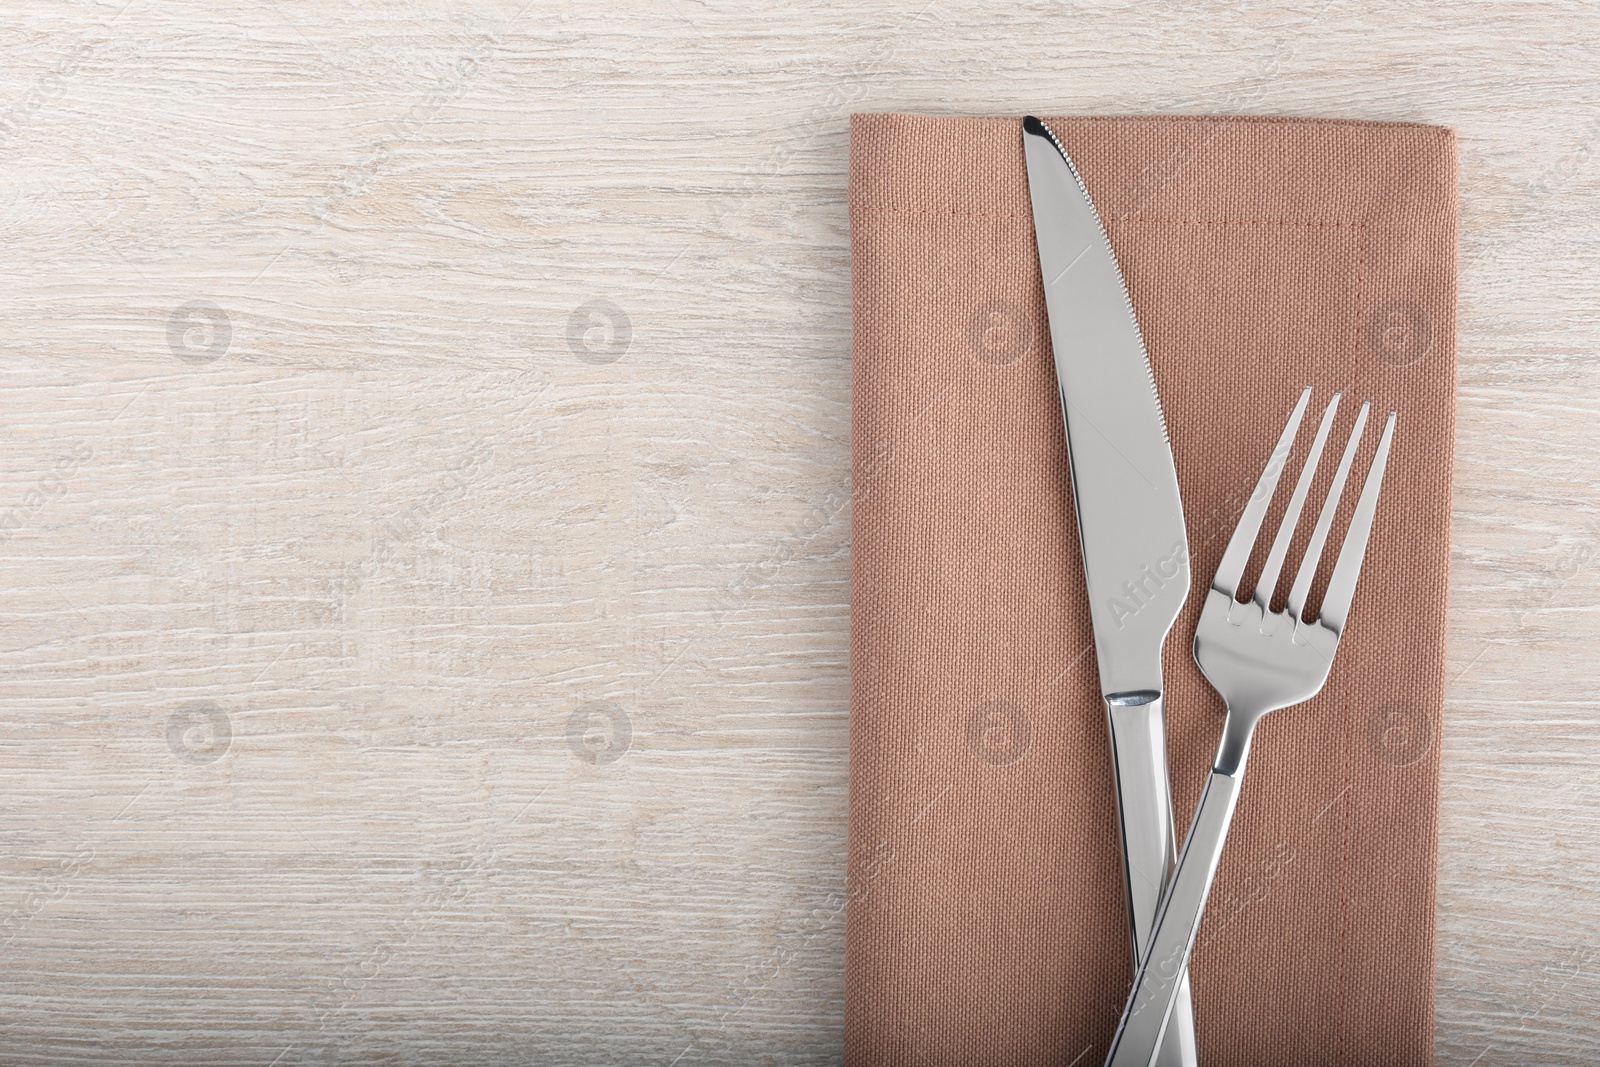 Photo of Shiny fork, knife and napkin on white wooden table, flat lay. Space for text